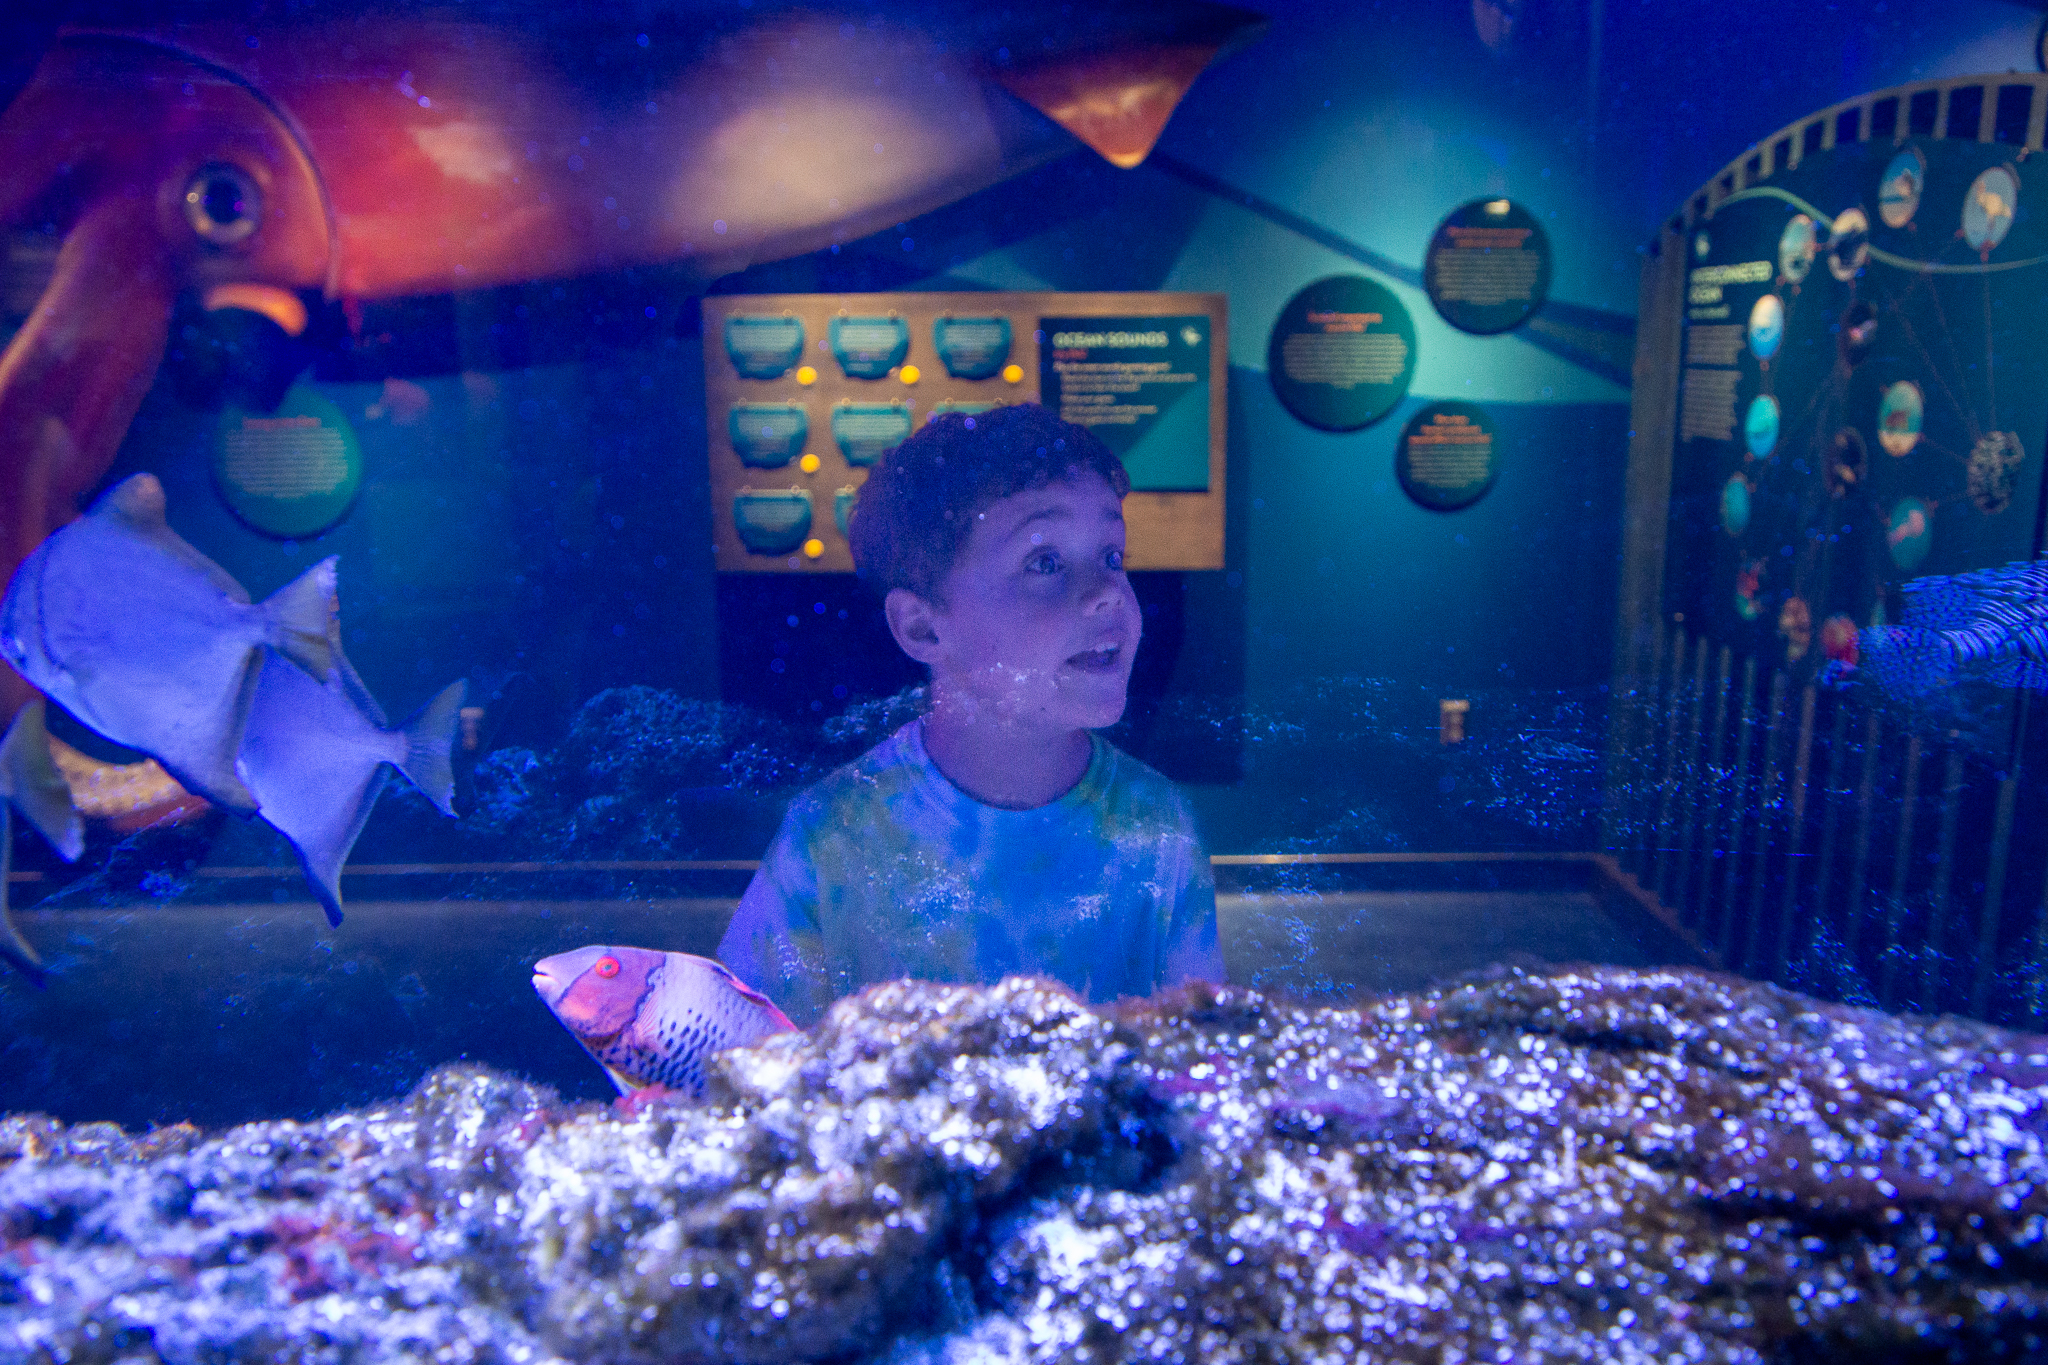 A little boy looks on in awe at an aquarium